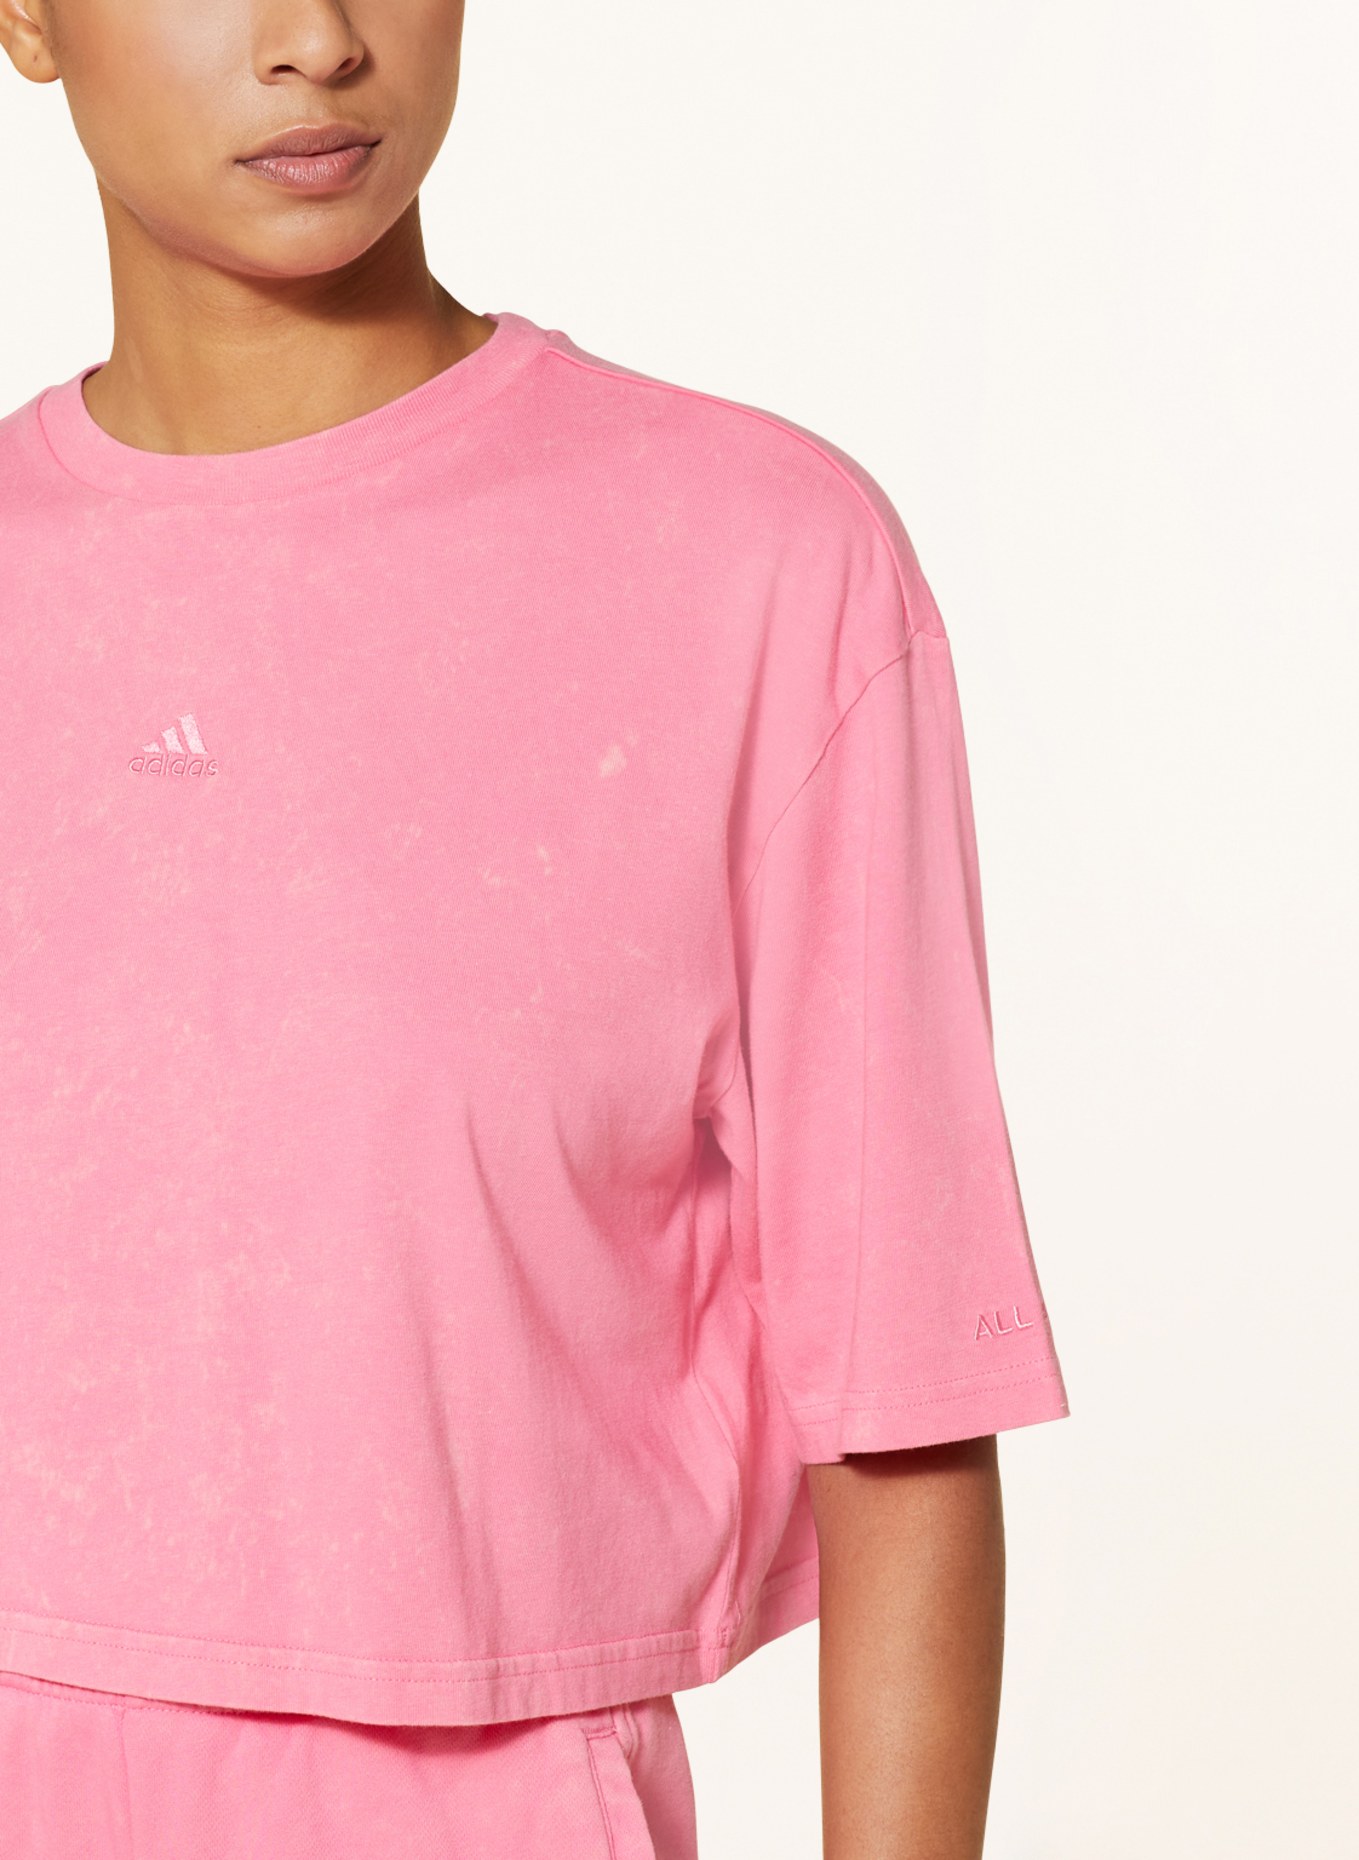 adidas Cropped shirt ALL SZN, Color: PINK (Image 4)